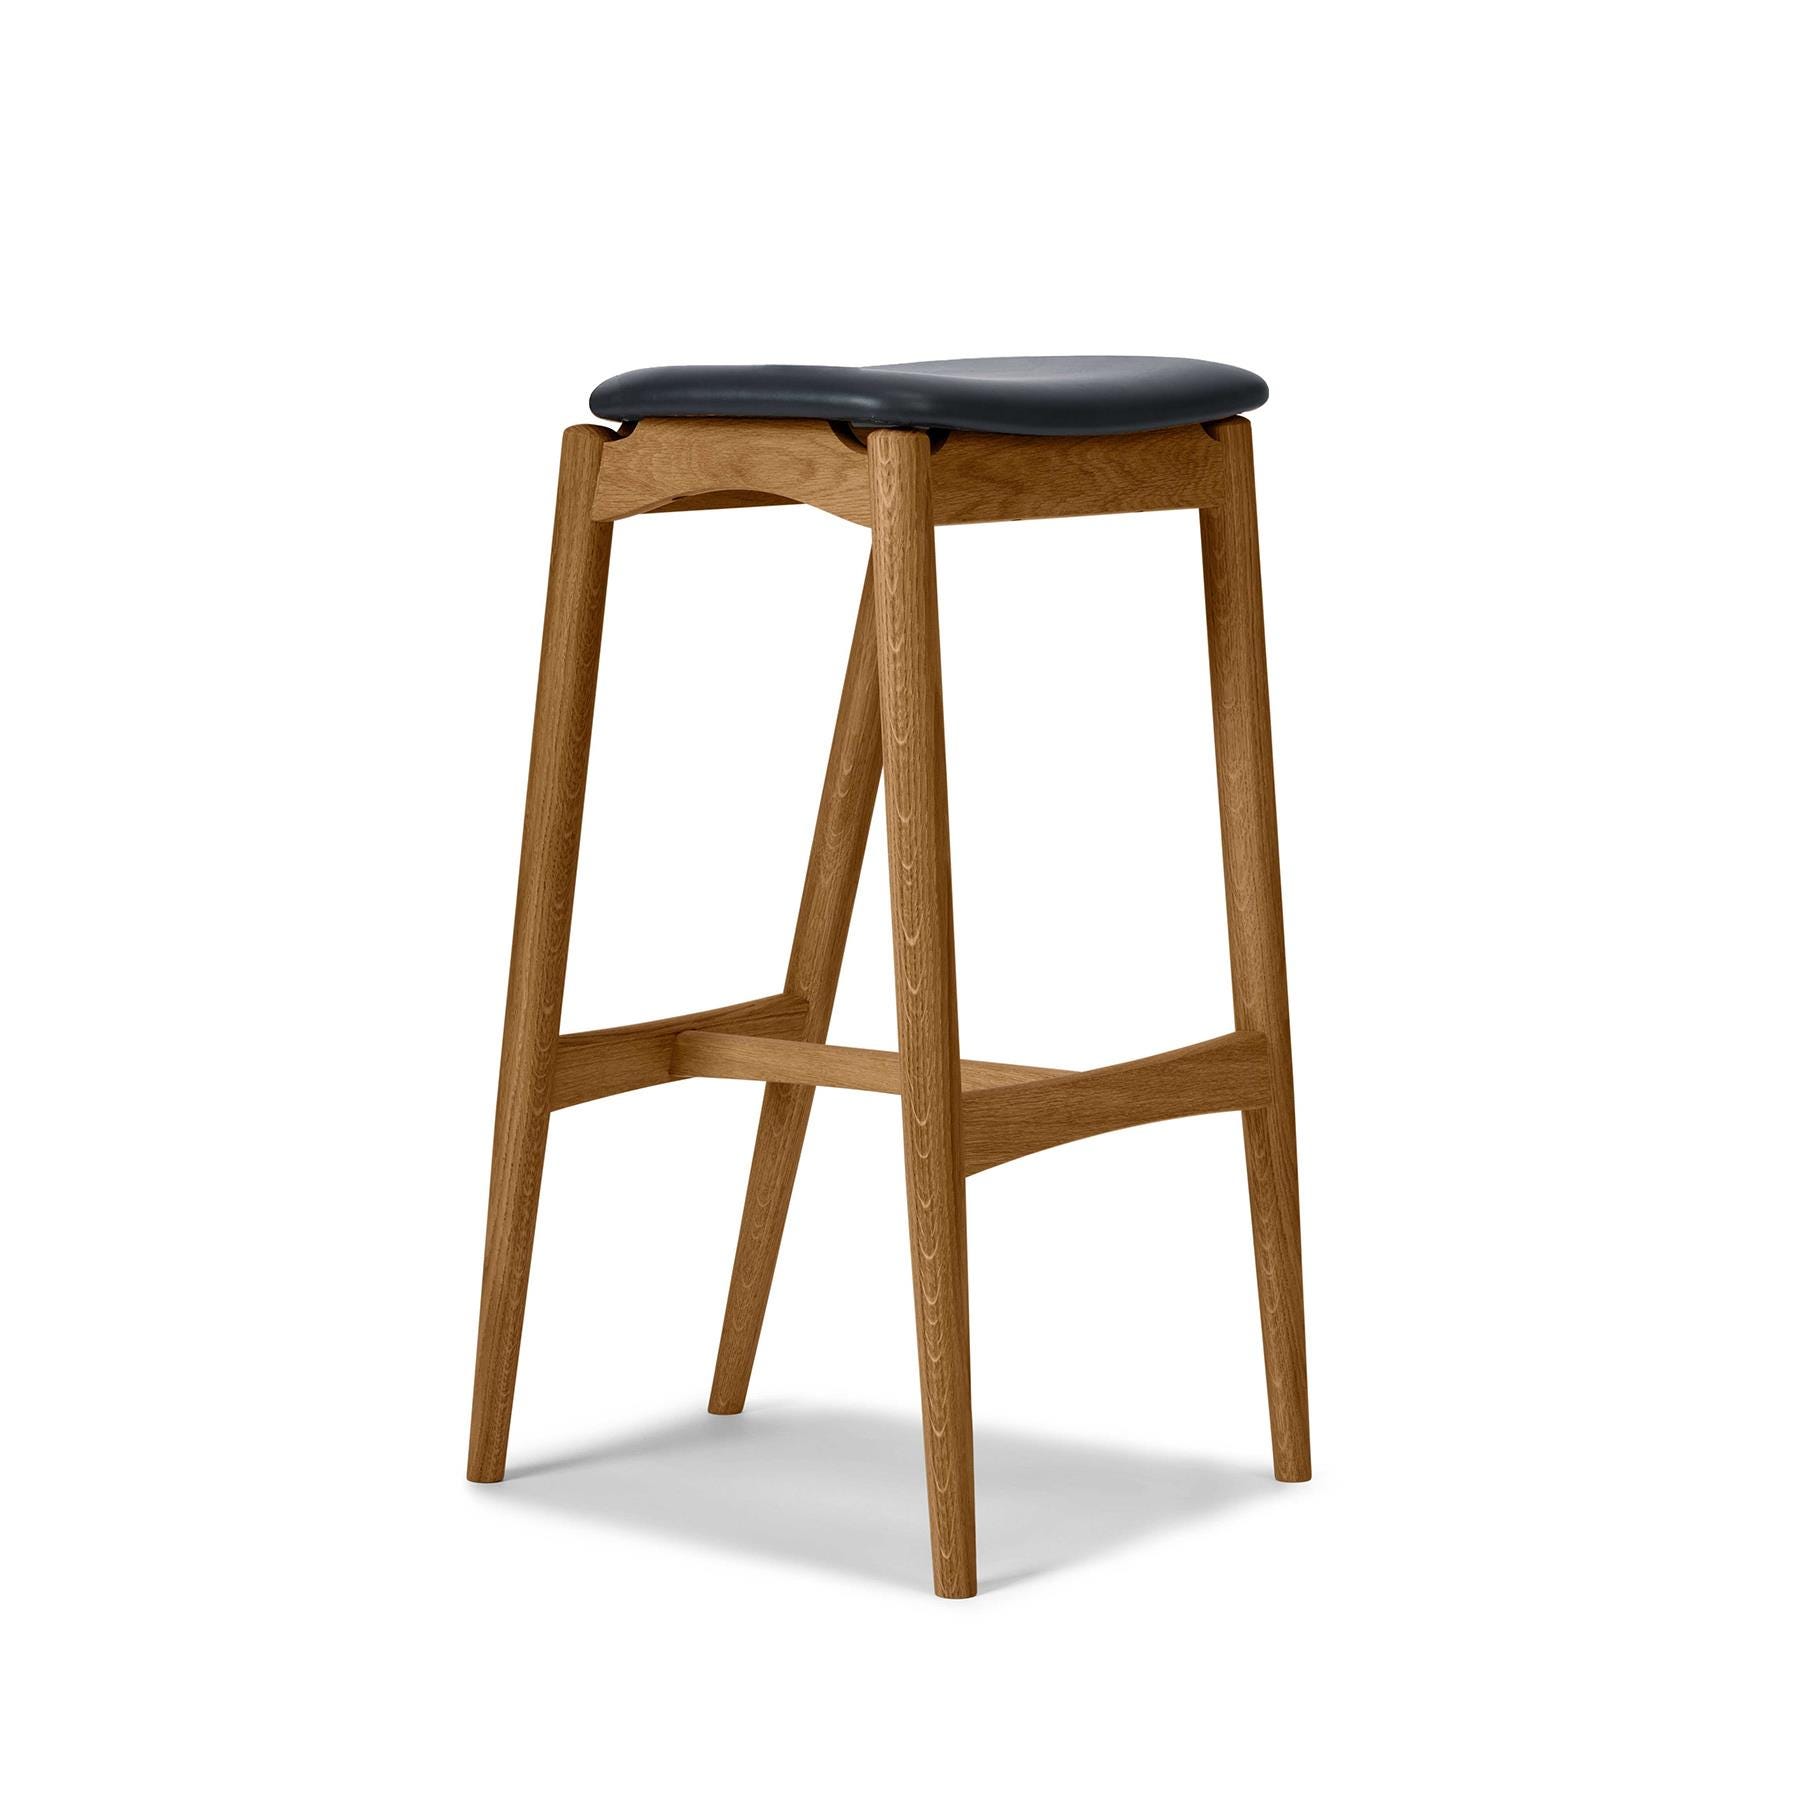 Sibast No 7 Stool Without Back High Bar Stool Natural Oil Oak Dunes Anthracite 21003 Light Wood Designer Furniture From Holloways Of Ludlow